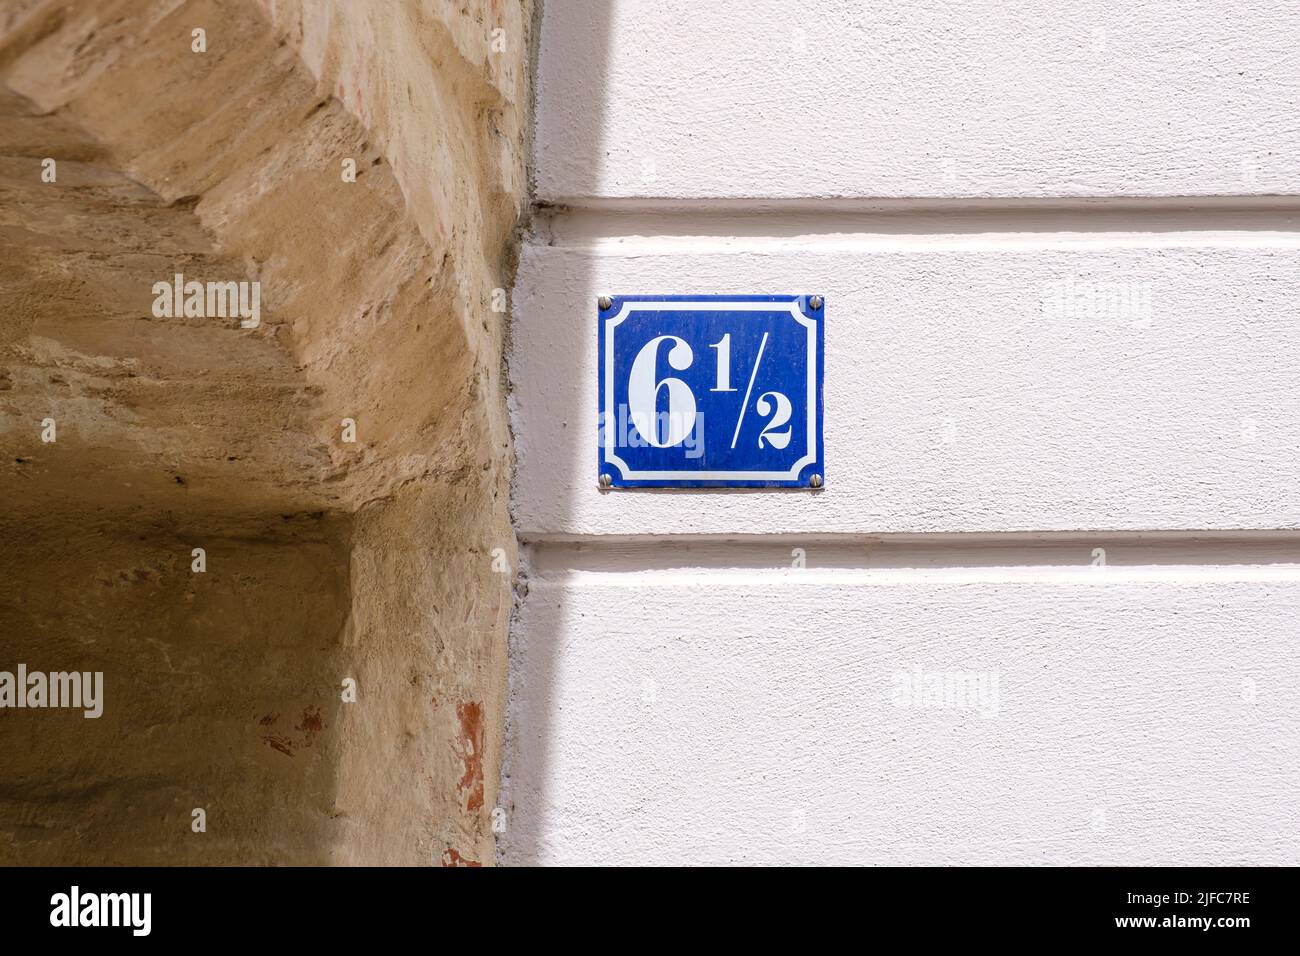 House number 6 1/2 (six and a half), a curiosity for some, but fractional house numbers actually exist. Stock Photo